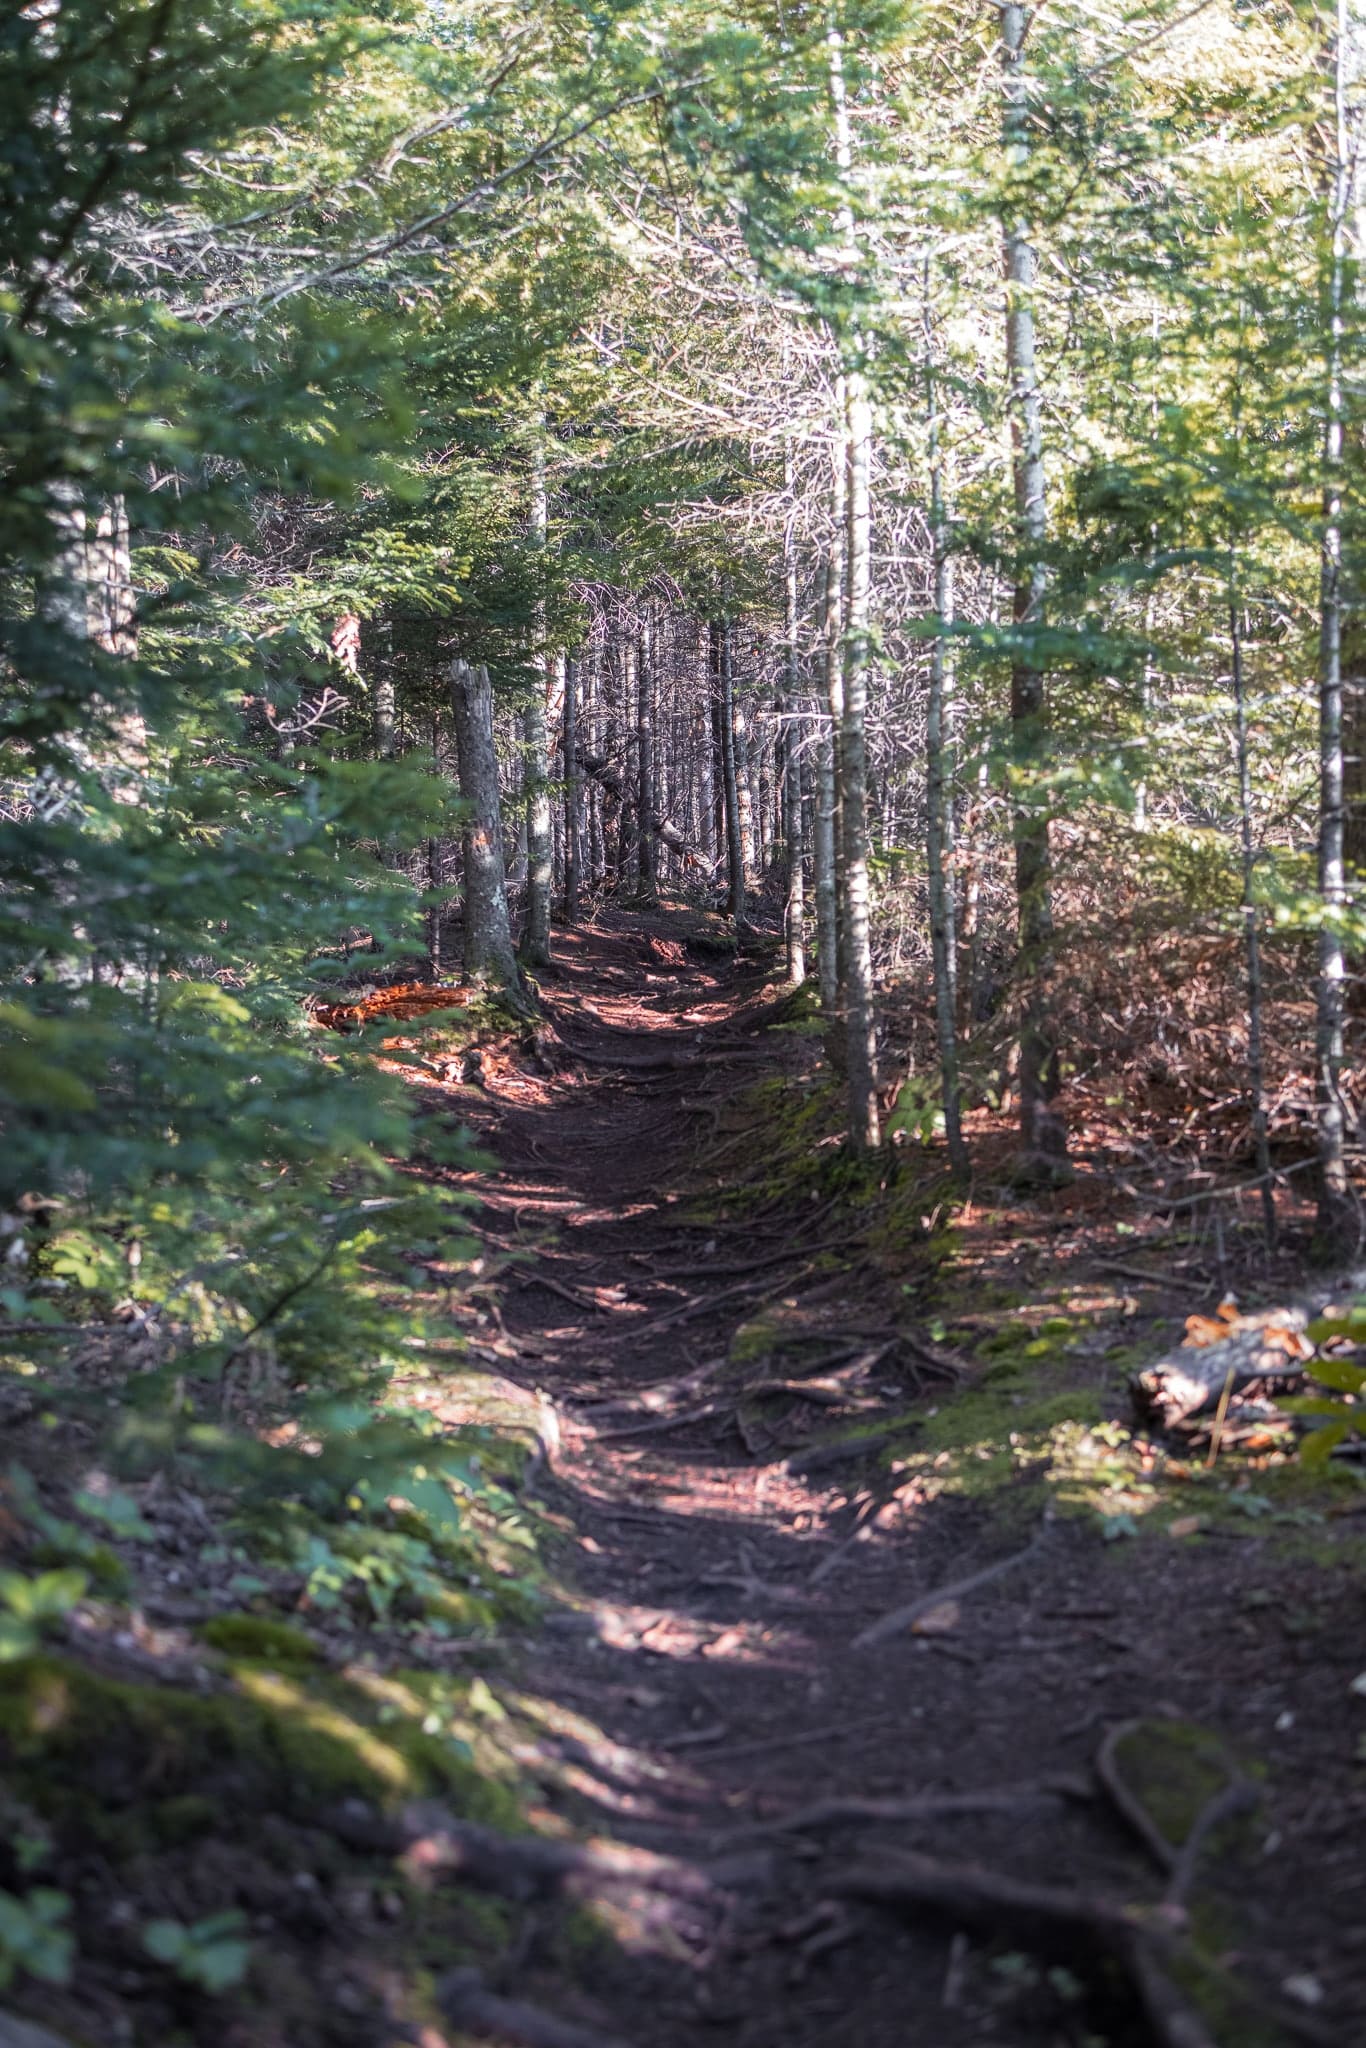 A rugged mountain hiking trail in New York State